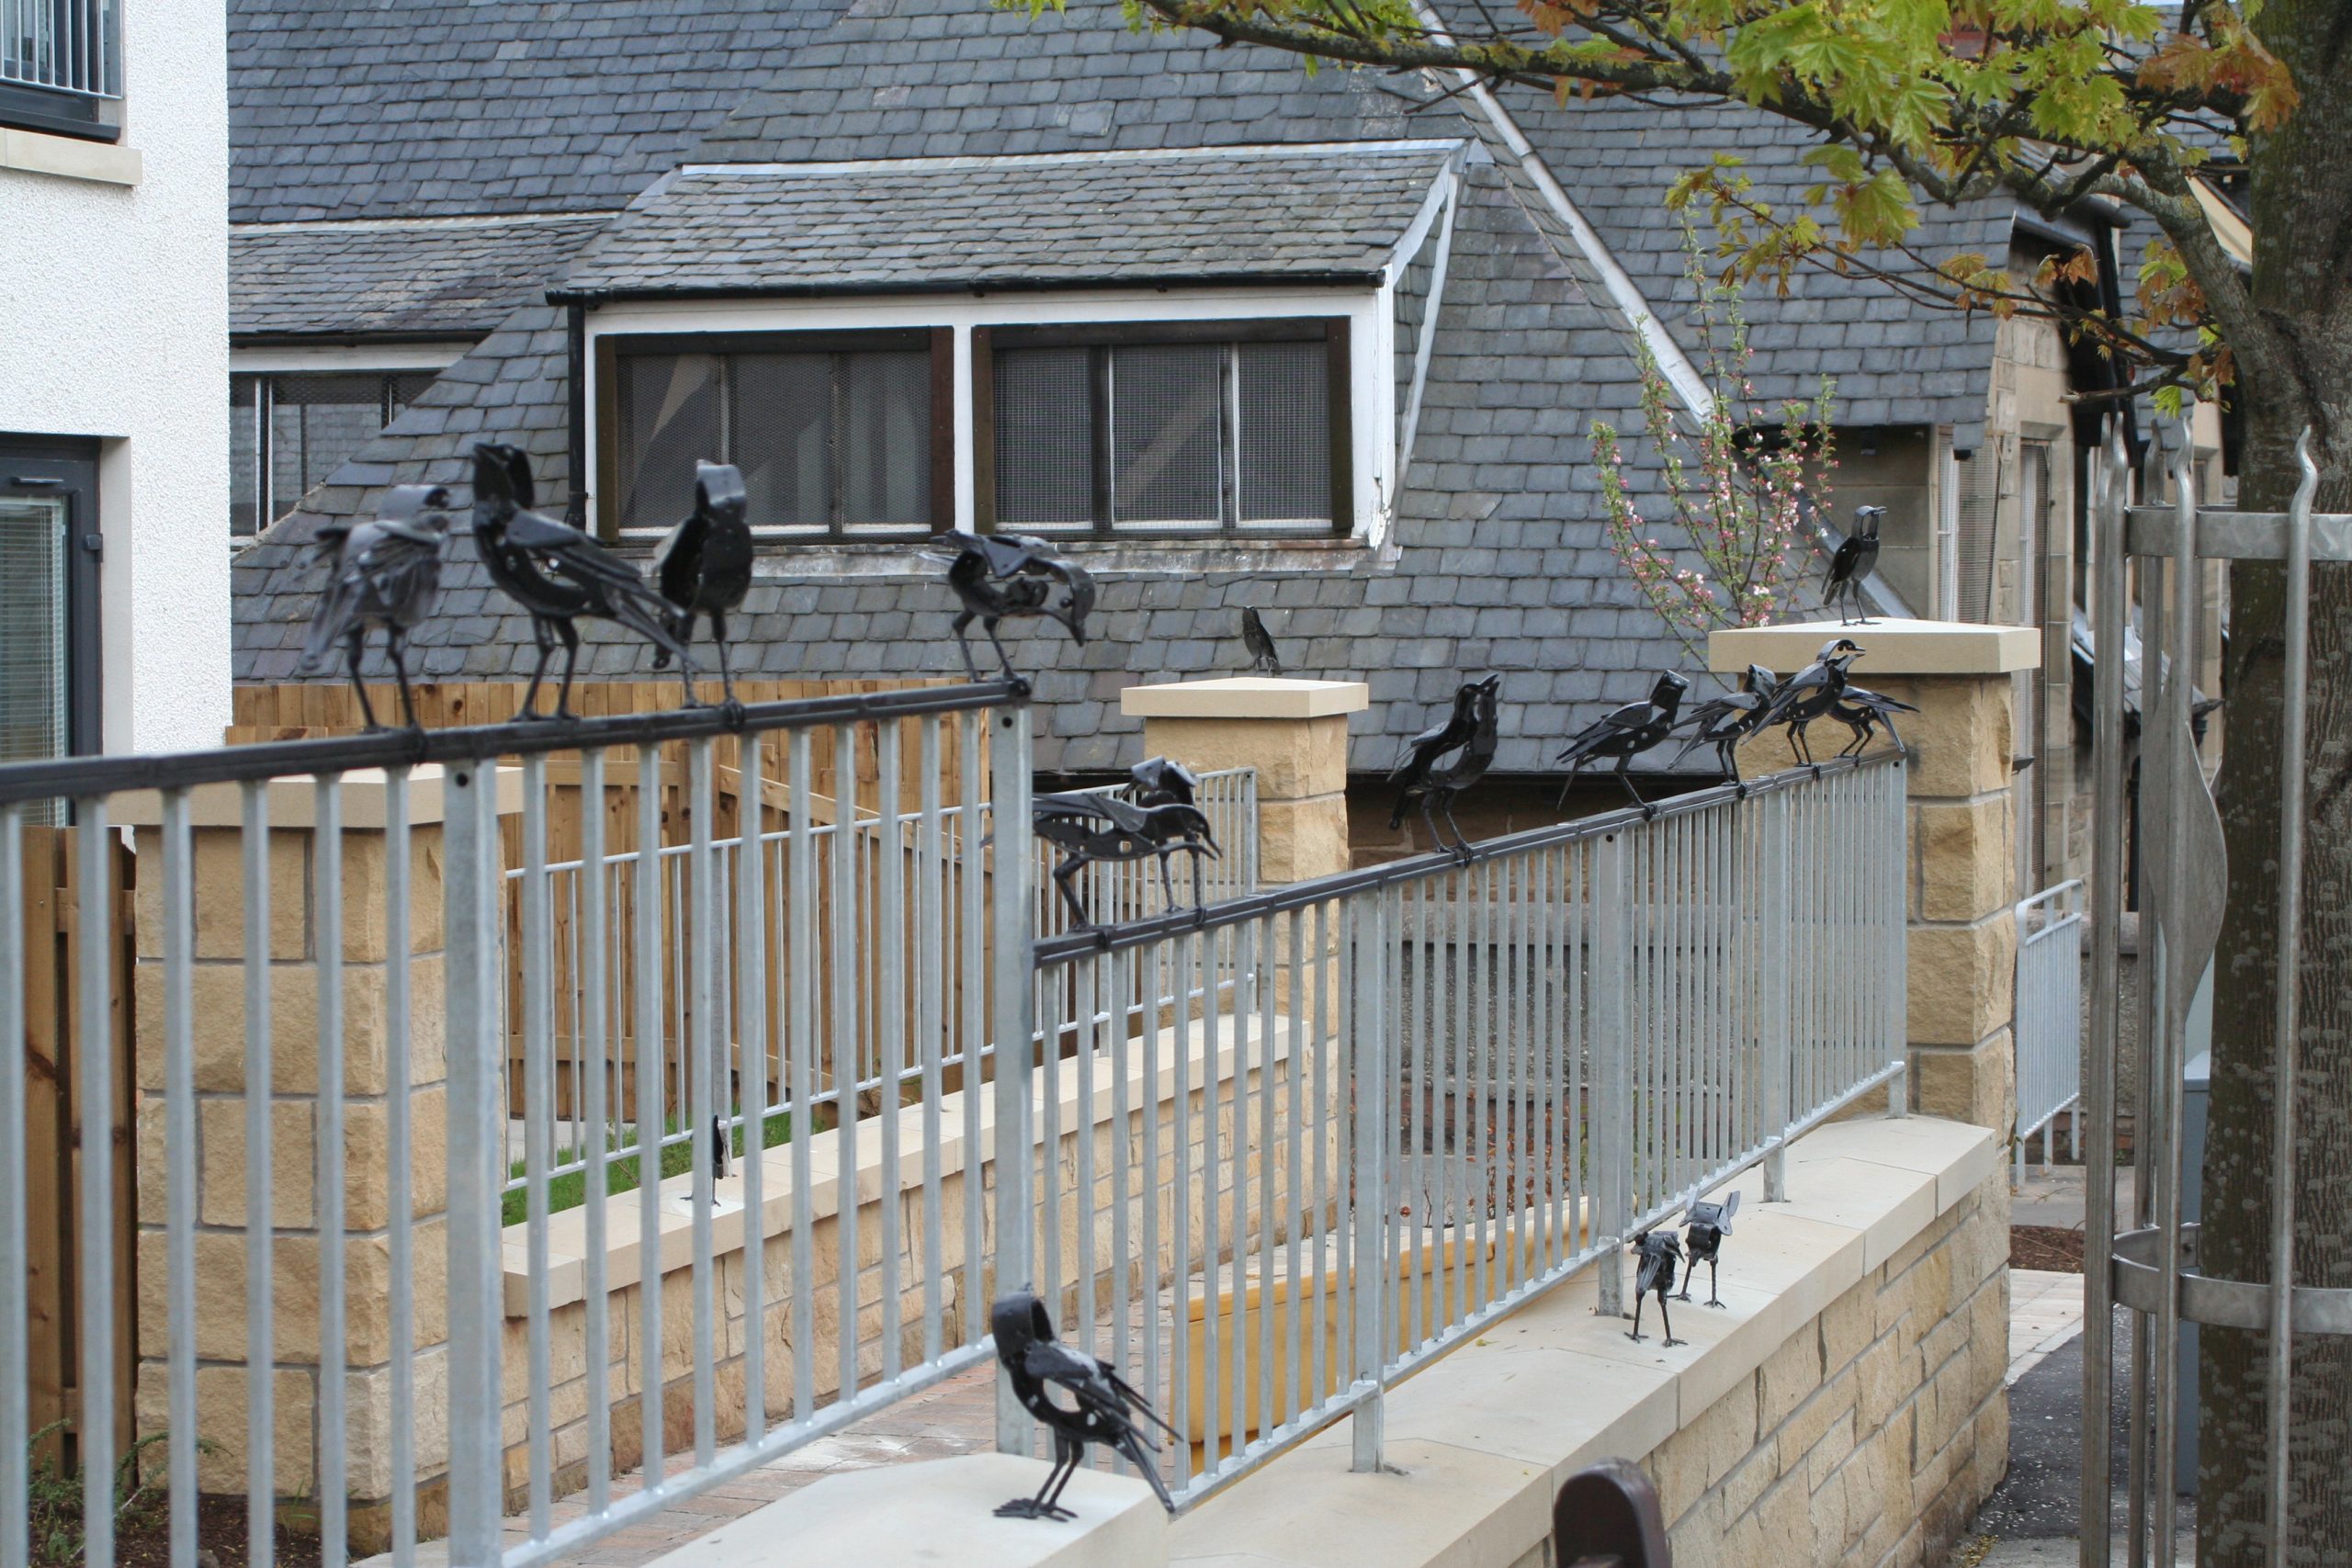 starling sculptures on railings